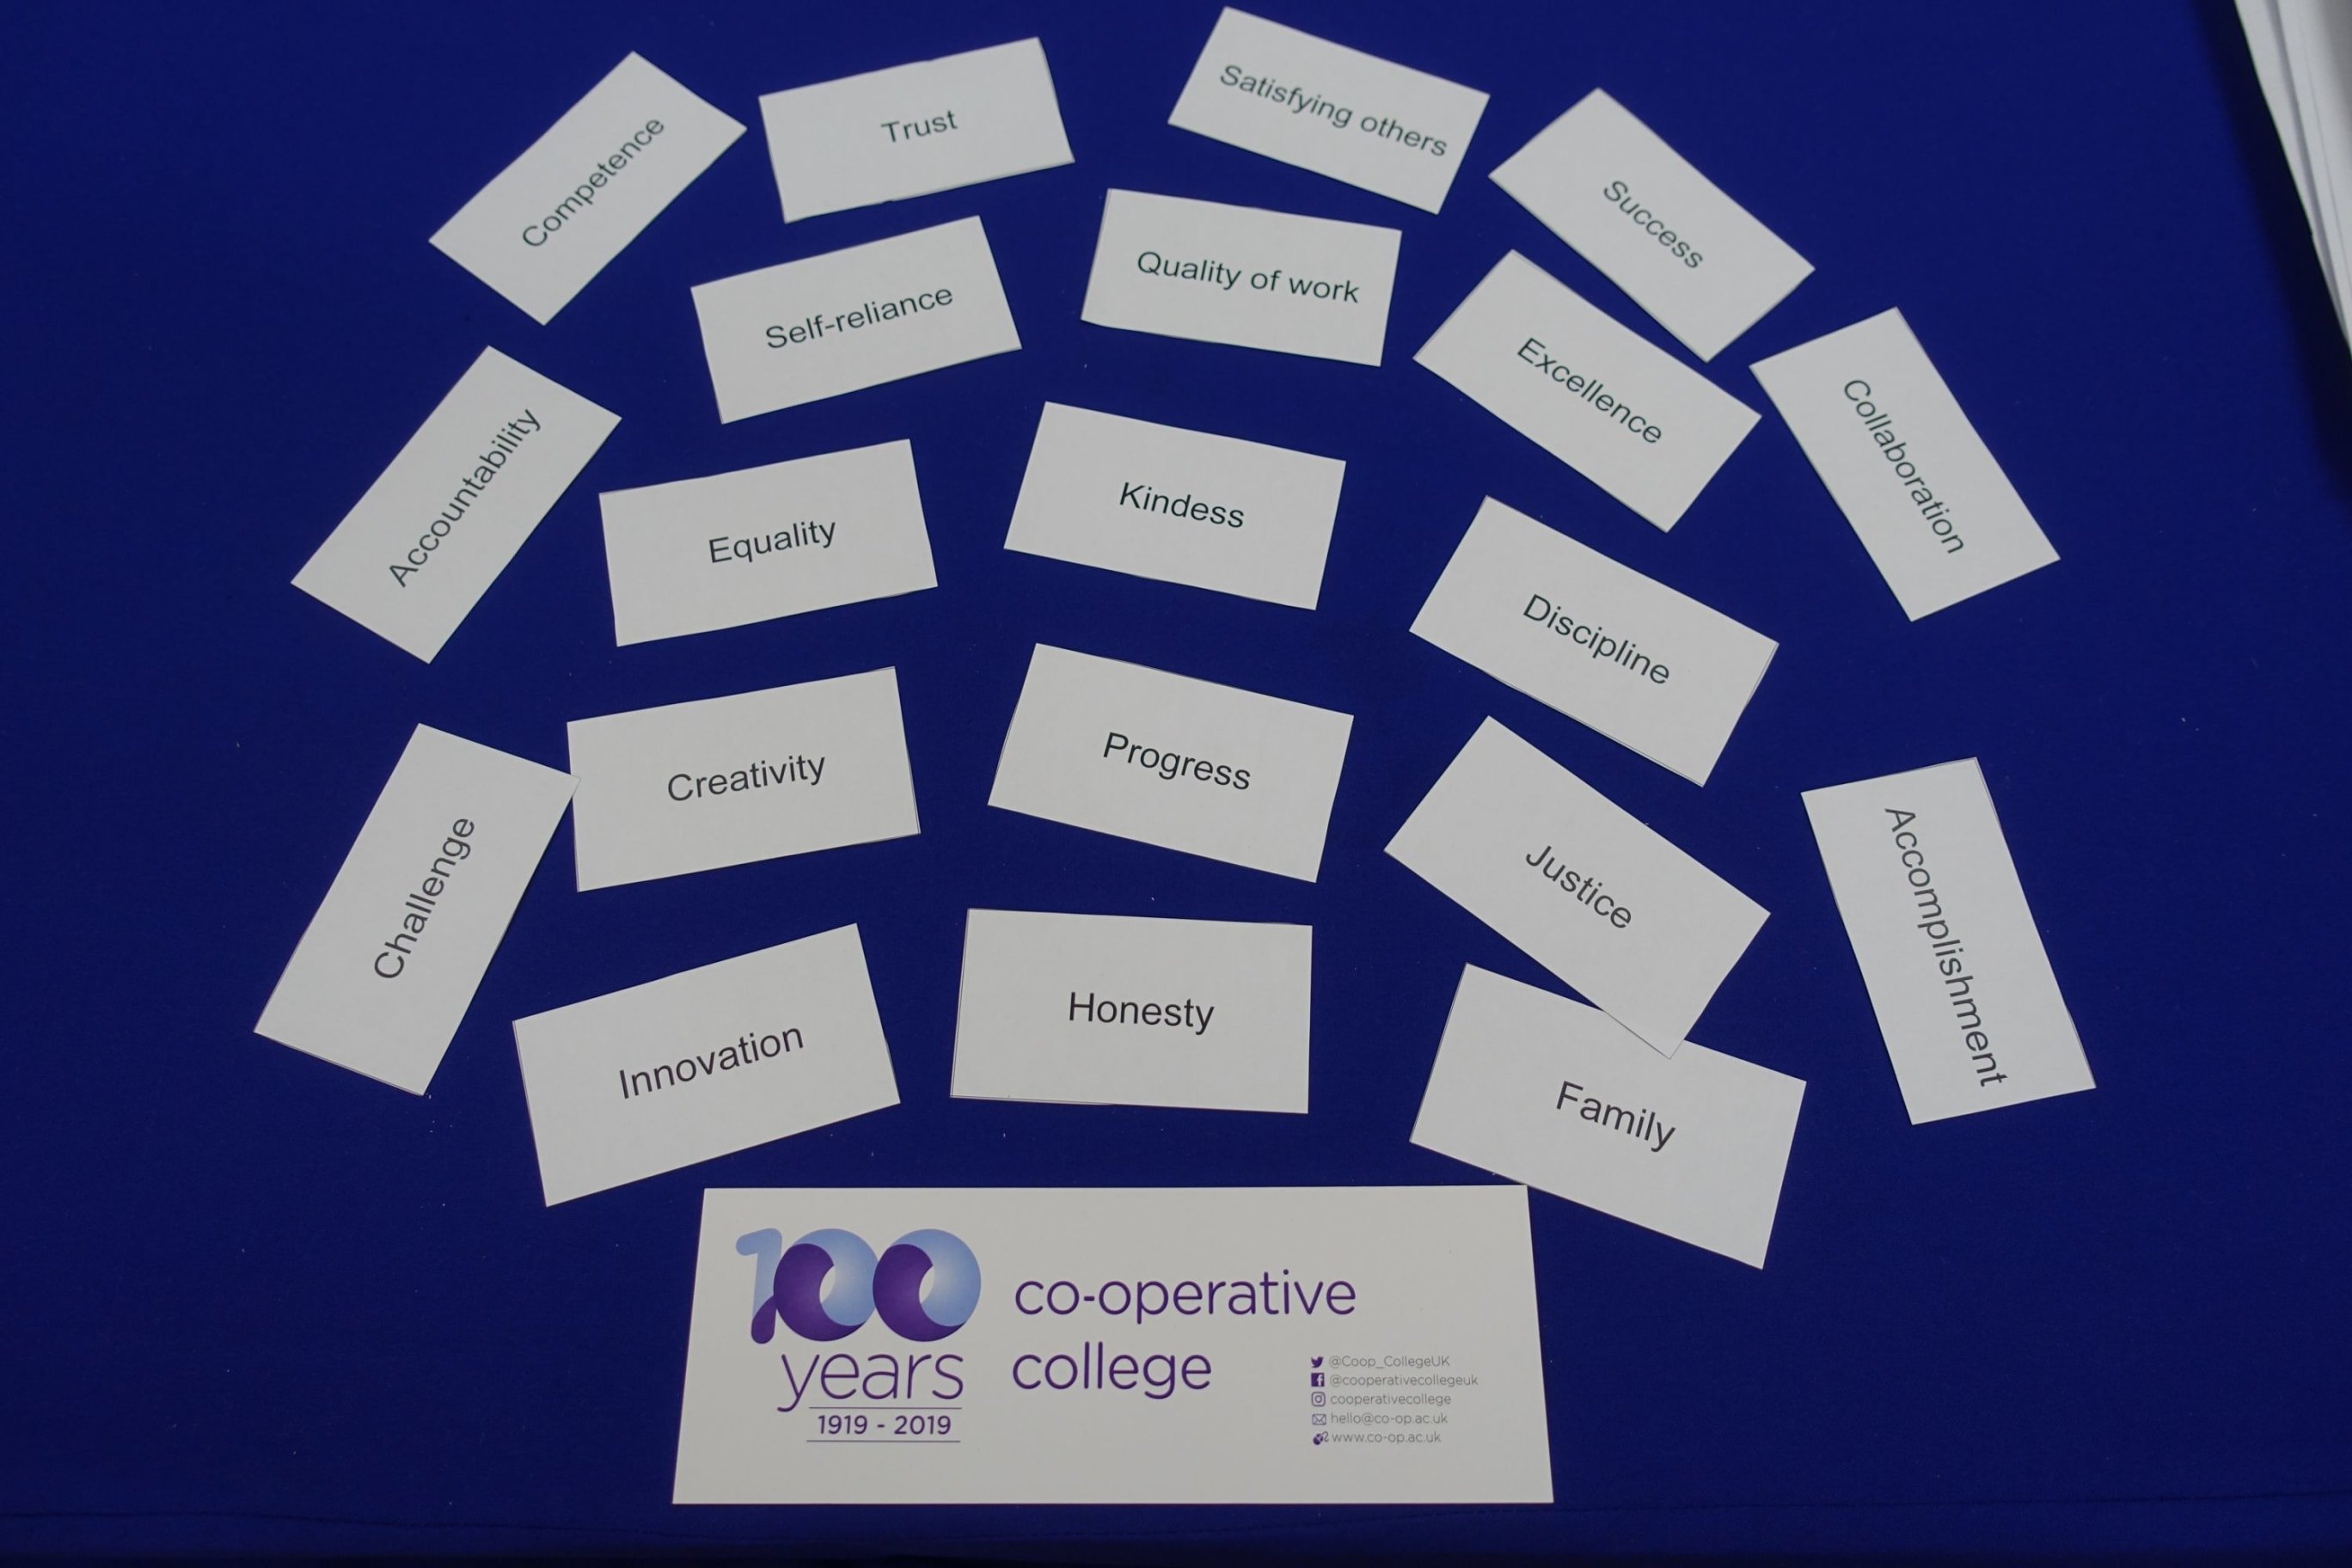 Co-operative Values exercise cards